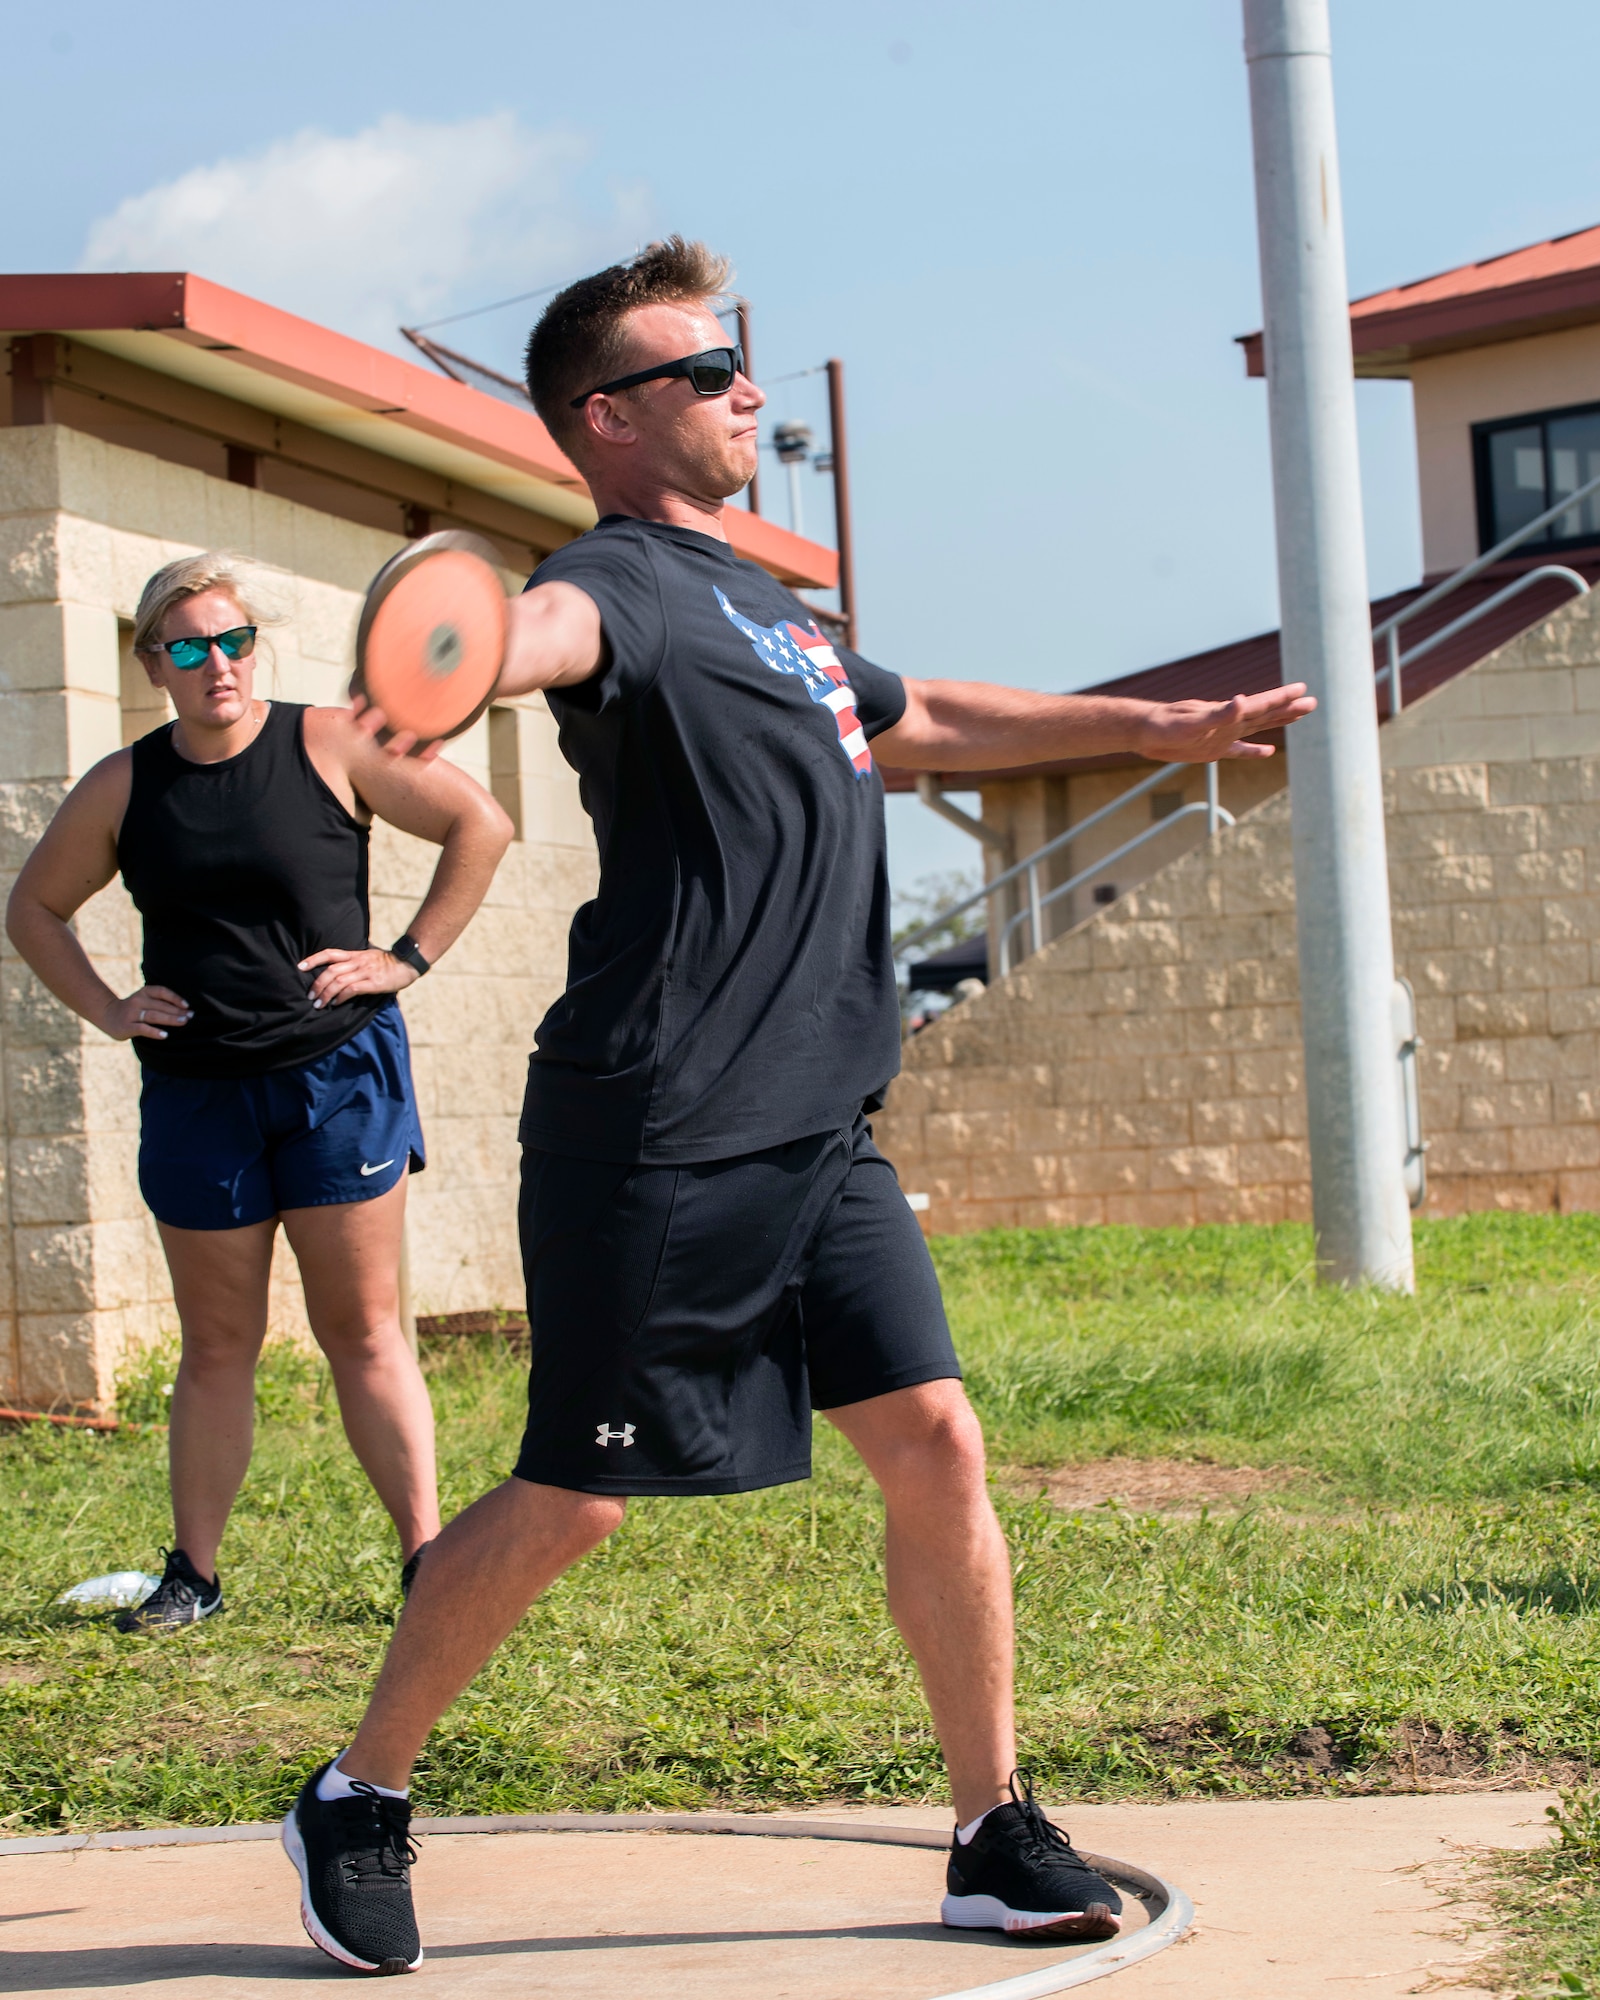 U.S. Army Staff Sgt. Russell Ruth, a wounded warrior athlete, practices a discus throw at MacDill Air Force Base, Fla., June 20, 2019.